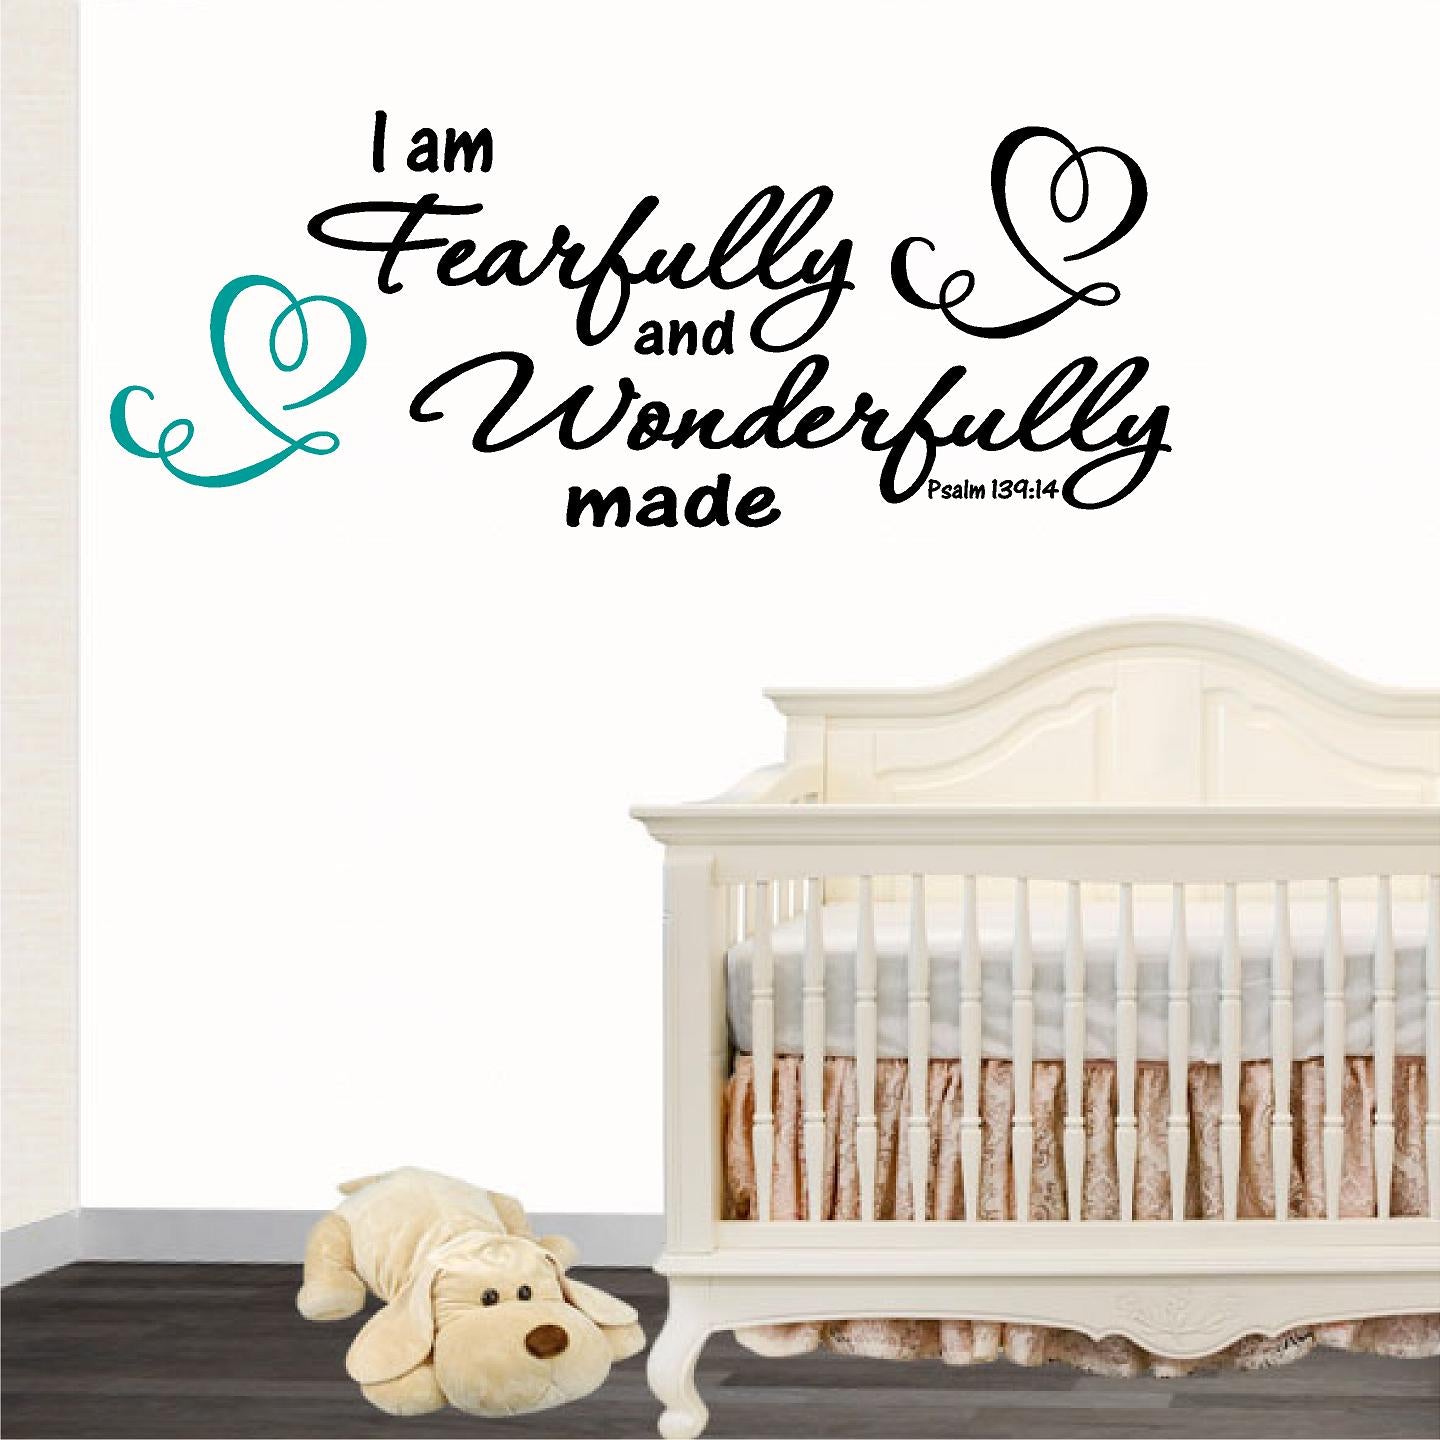 Stickers. Vinyl Wall Decal. Bible Scripture: Psalm 139:14 Wonderfully Made.